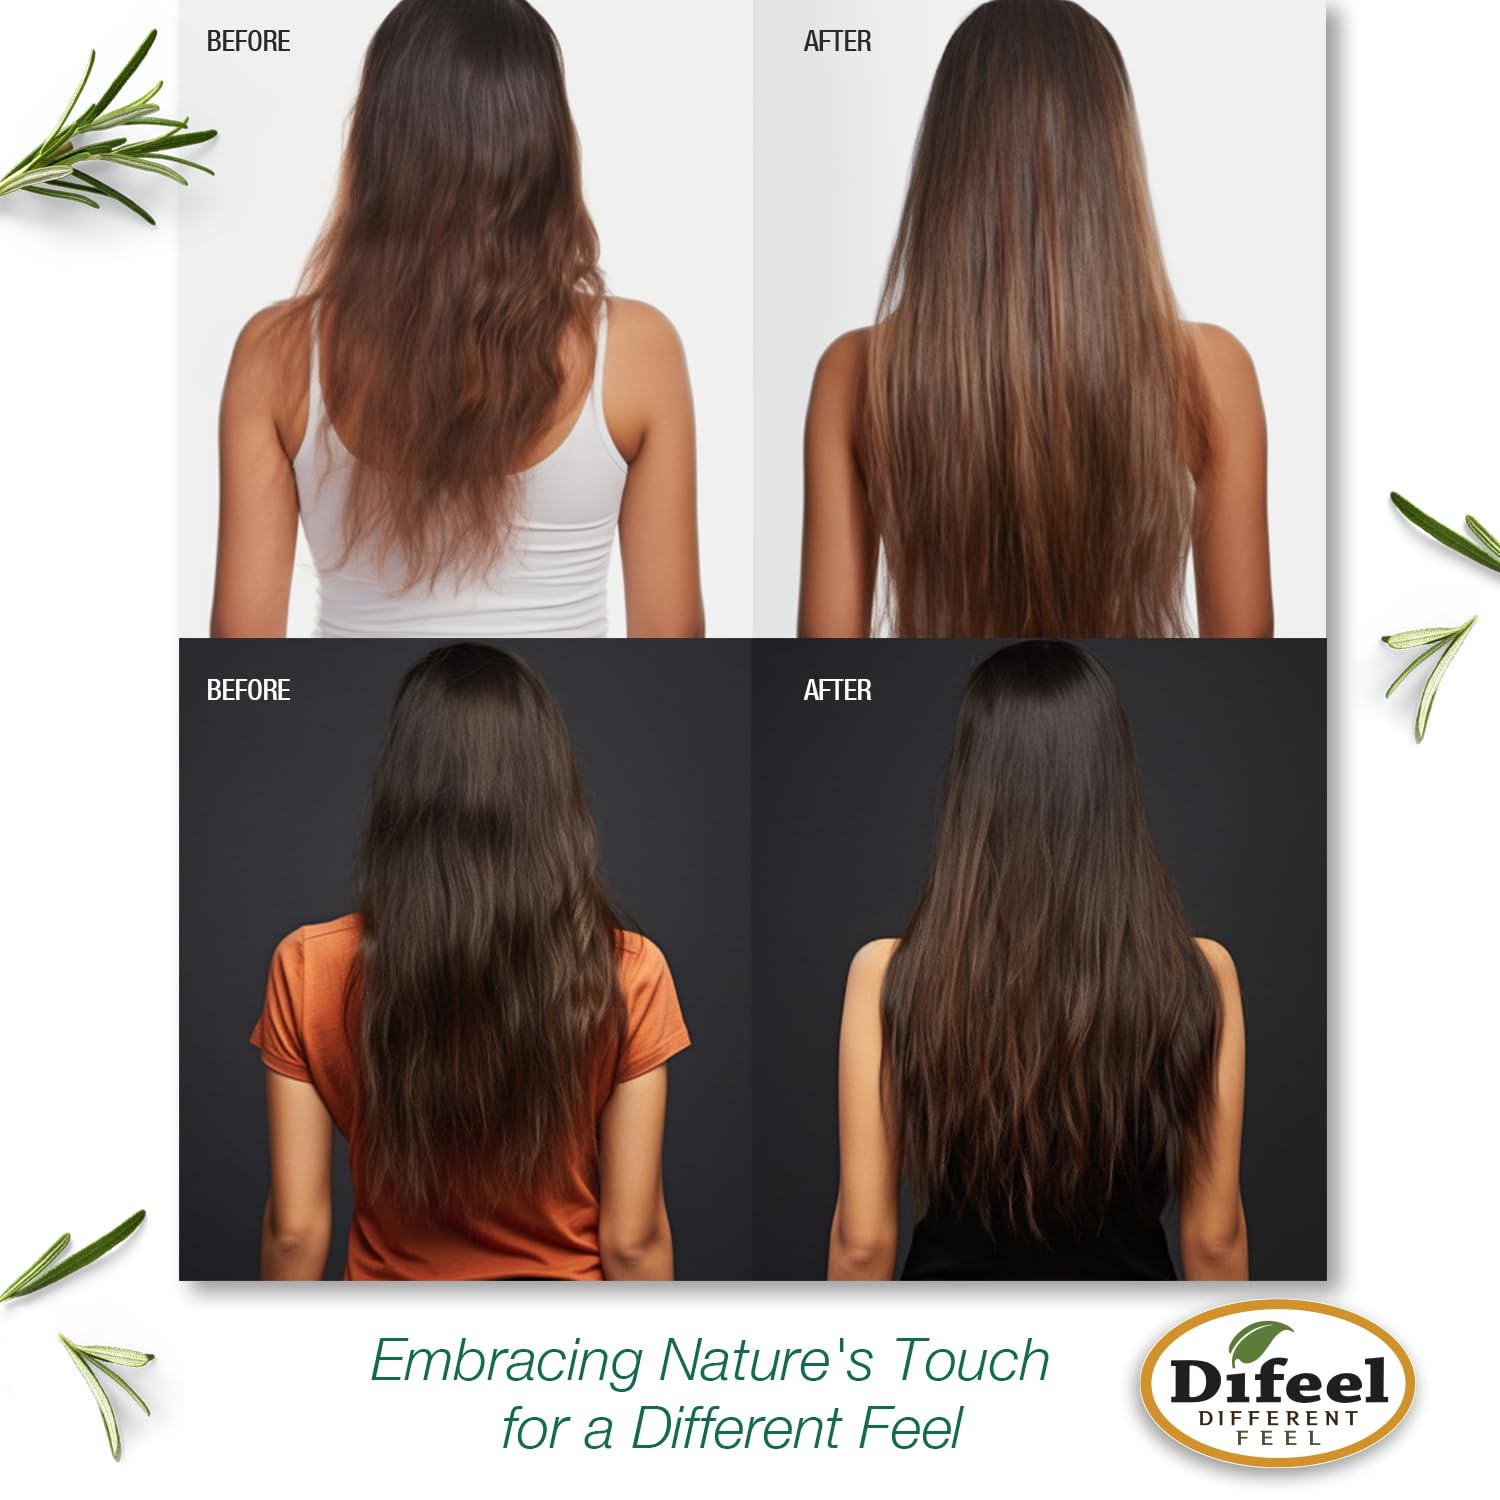 Difeel Rosemary and Mint Premium Hair Oil with Biotin - LARGE 12 oz. - Natural Rosemary Oil for Hair Growth & Biotin